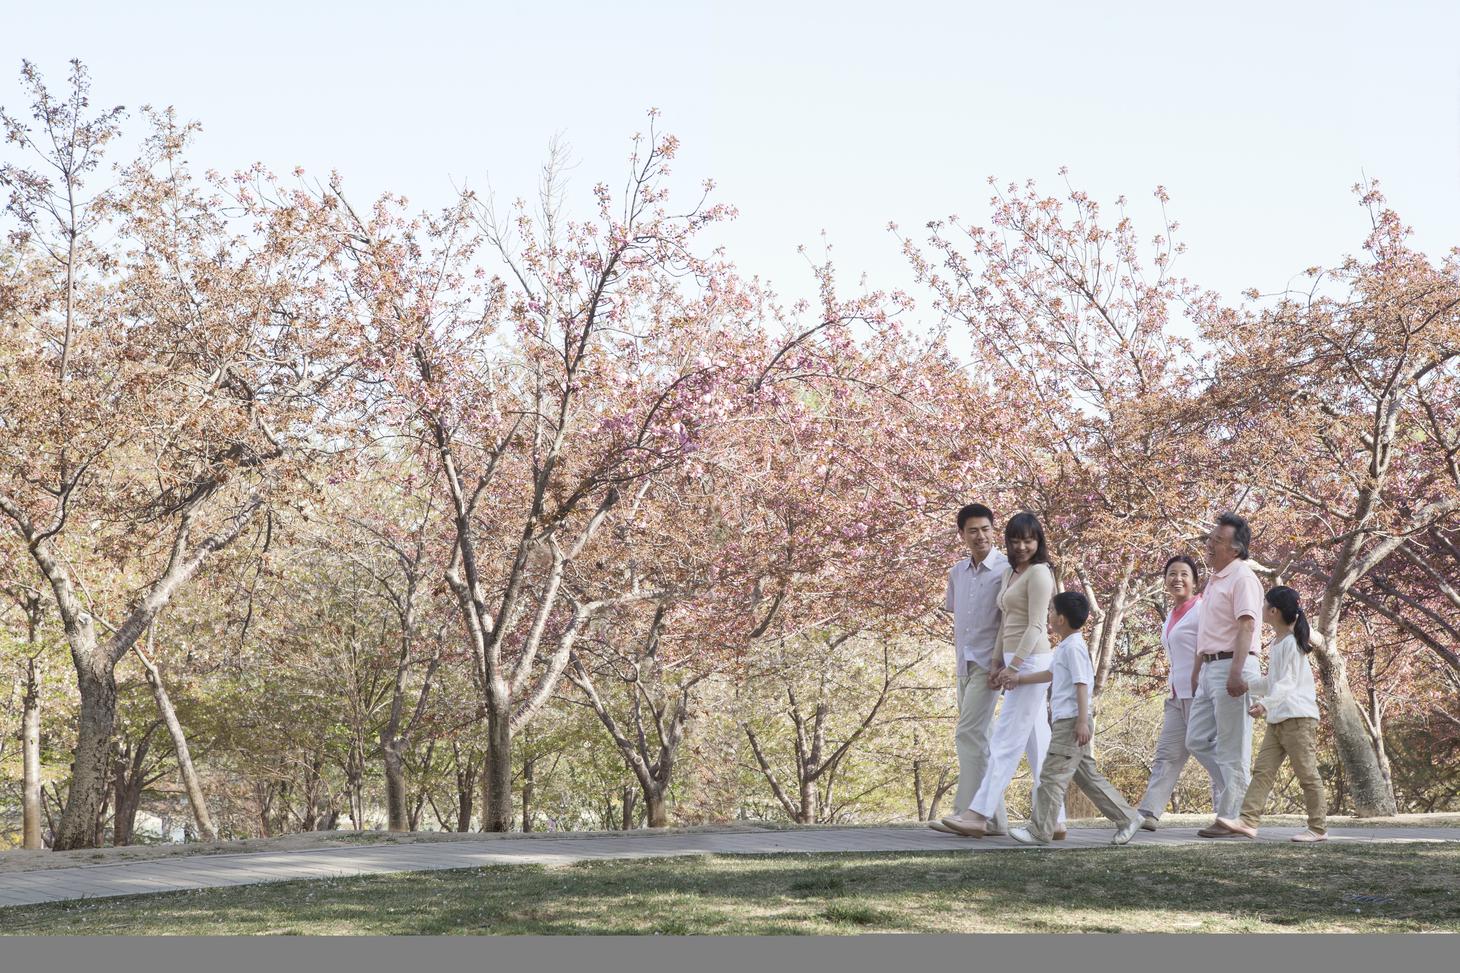 Outdoor - Multi-generational family taking a walk amongst cherry trees